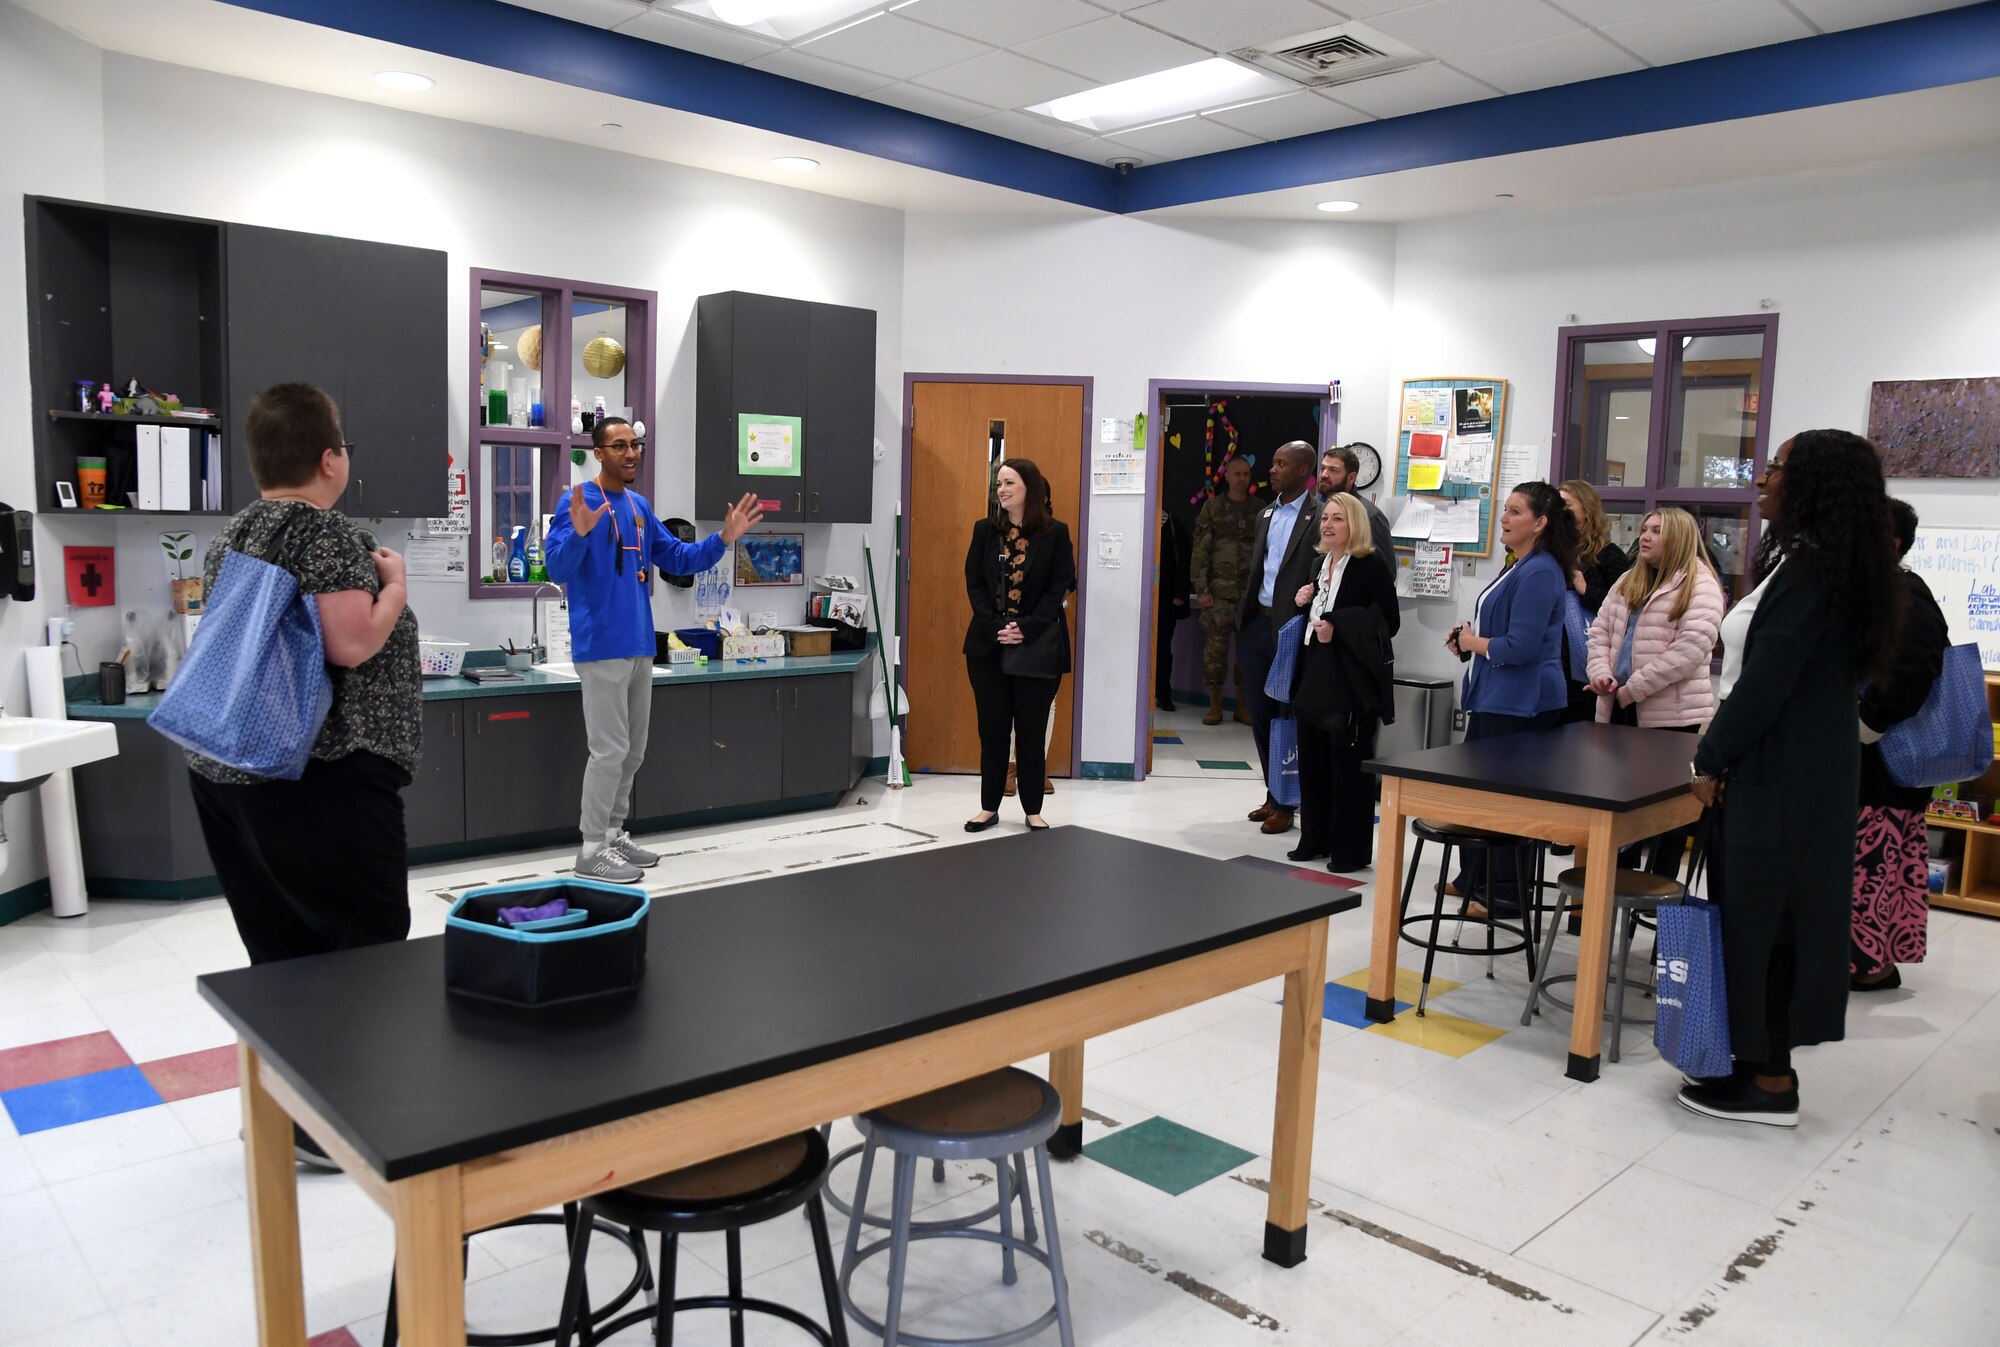 Marcus Jordan, 81st Force Support Squadron child and youth program assistant, provides a tour of the STEM lab inside the youth center to honorary commanders and civic leaders at Keesler Air Force Base, Mississippi, Feb. 17, 2023.